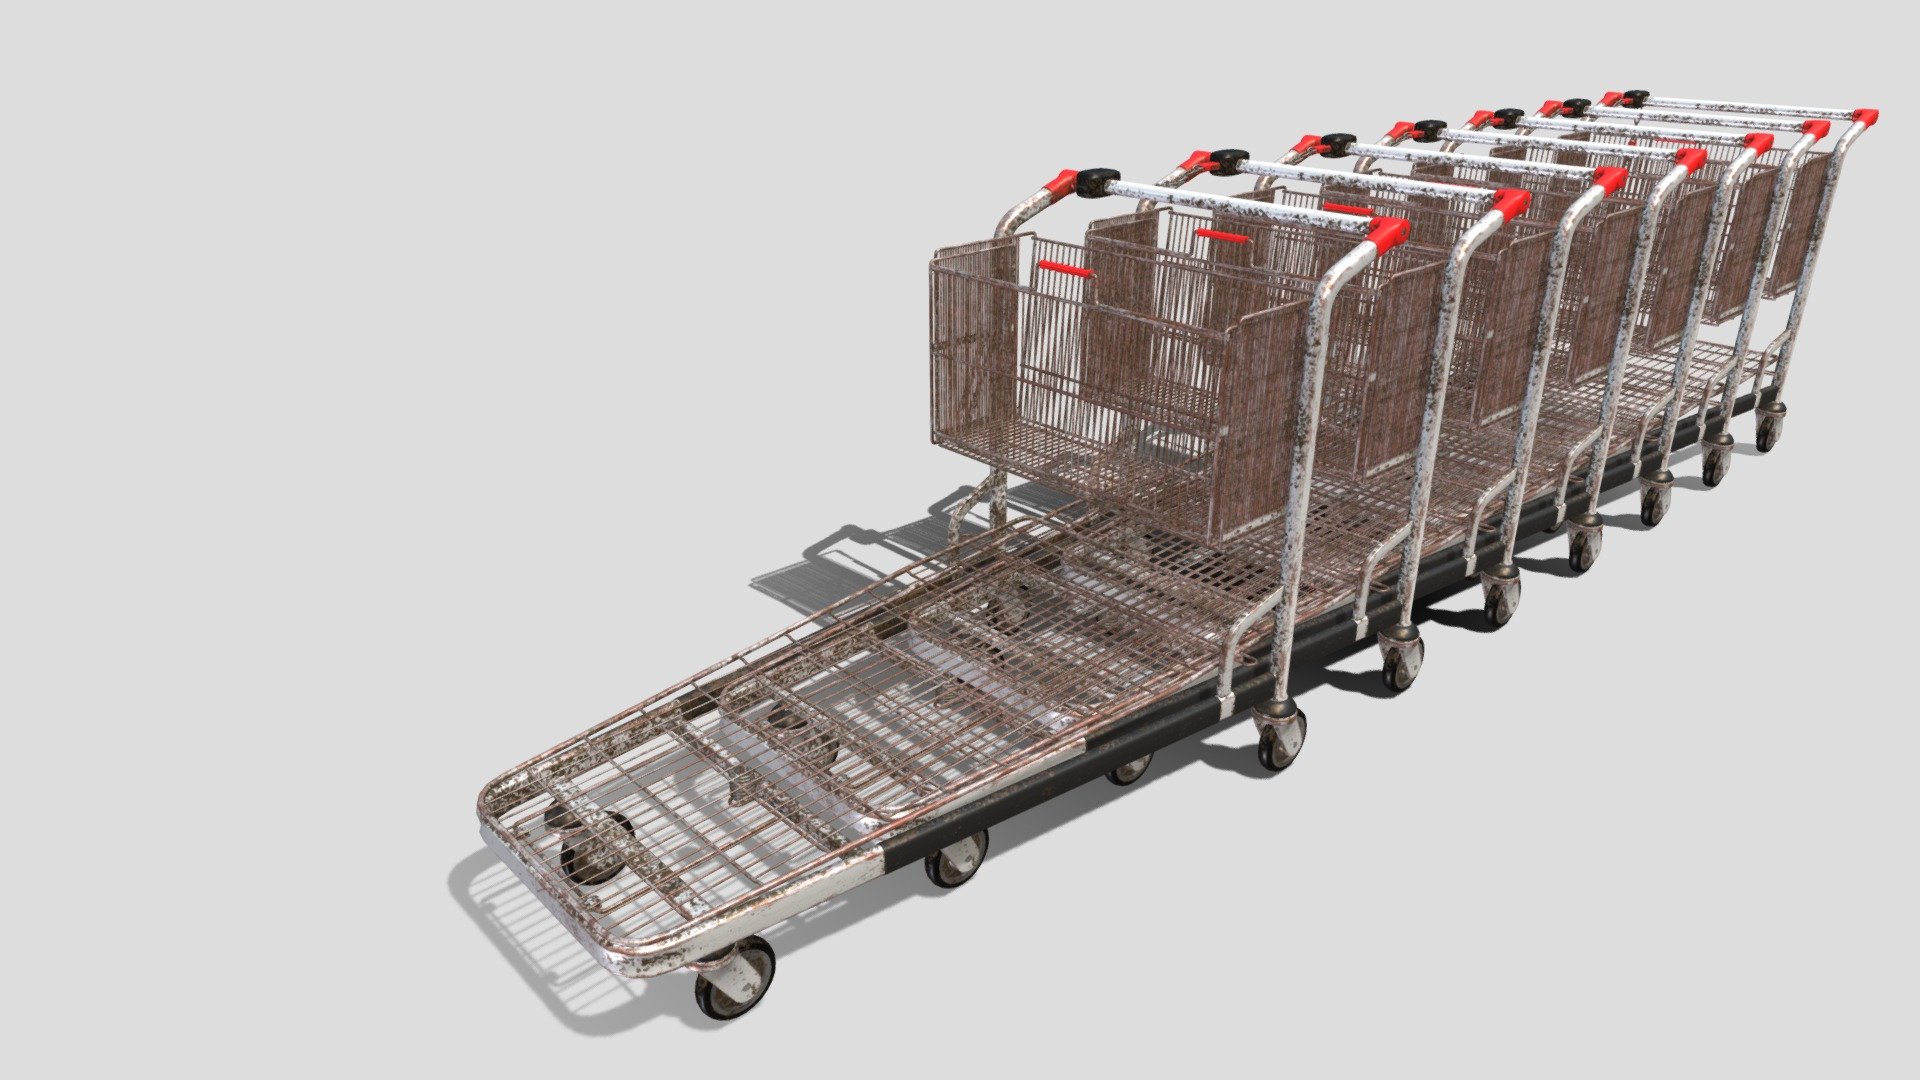 Shopping cart stack 3d model rendered with Cycles in Blender, as per seen on attached images. 
The model is scaled to real-life scale. Poly count is for one cart.

File formats:
-.blend, rendered with cycles, as seen in the images;
-.obj, with materials applied;
-.dae, with materials applied;
-.fbx, with material slots applied;
-.stl;

Three sets of files are provided, one with the basket open and one with it closed, and one with the stack.
Files come named appropriately and split by file format.

3D Software:
The 3D model was originally created in Blender 2.8 and rendered with Cycles.

Materials and textures:
PBR material is being used, consisting of five 4k image textures (Base/Disp/Metallic/Normal/Roughness). 
Certain 3d softwares can possibly need texture re-assigning in order to get the proper material effect.

e the exact result as seen in previews 3d model